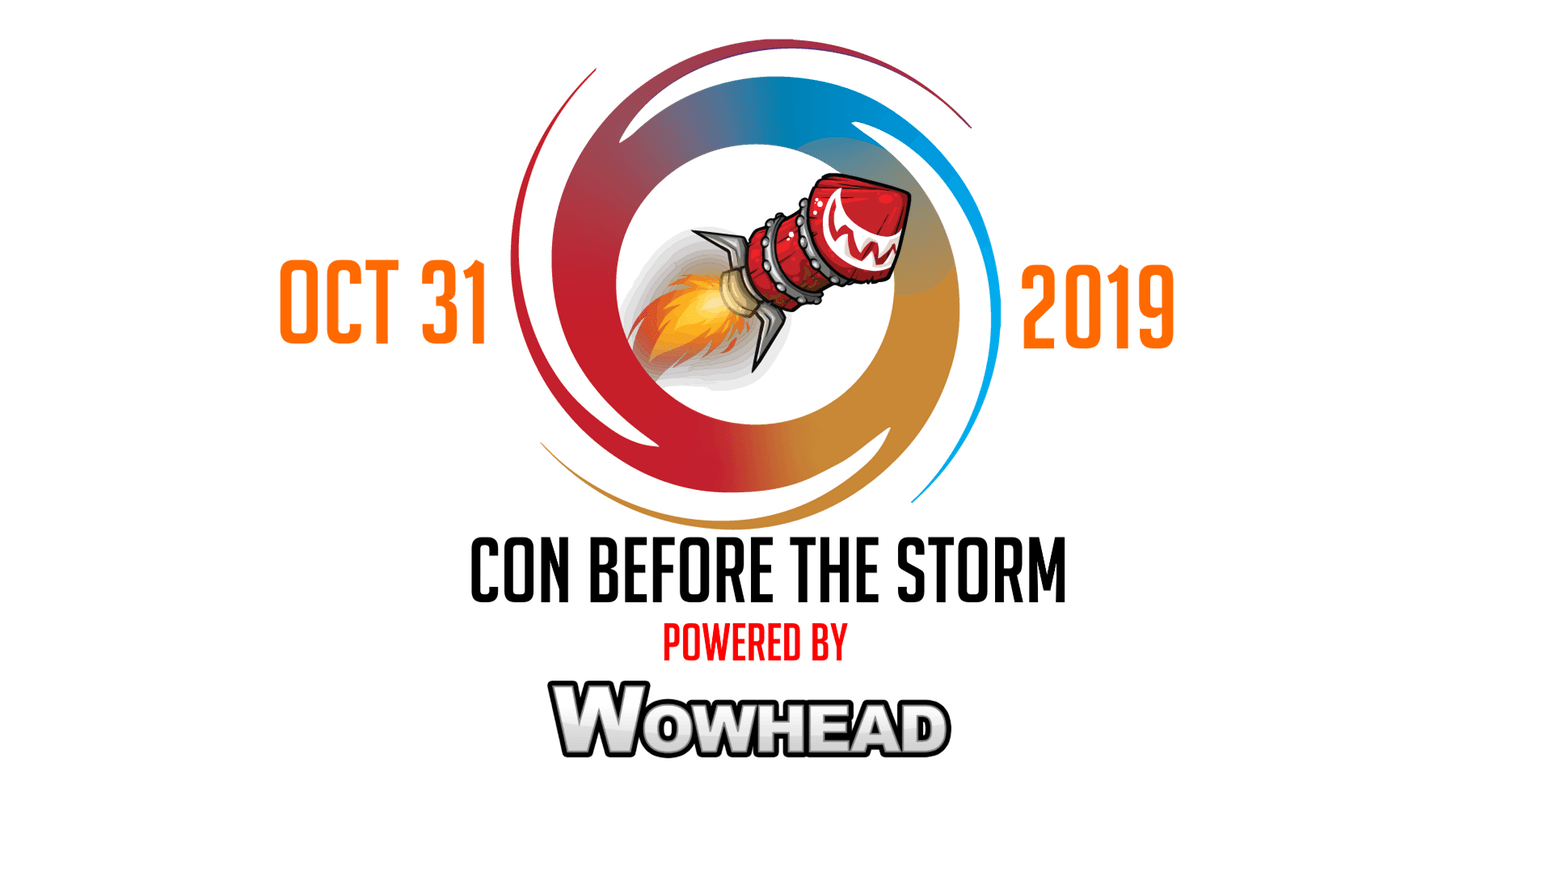 Wowhead.com Logo - Con Before the Storm 2019 Powered by Wowhead by d20crit.com